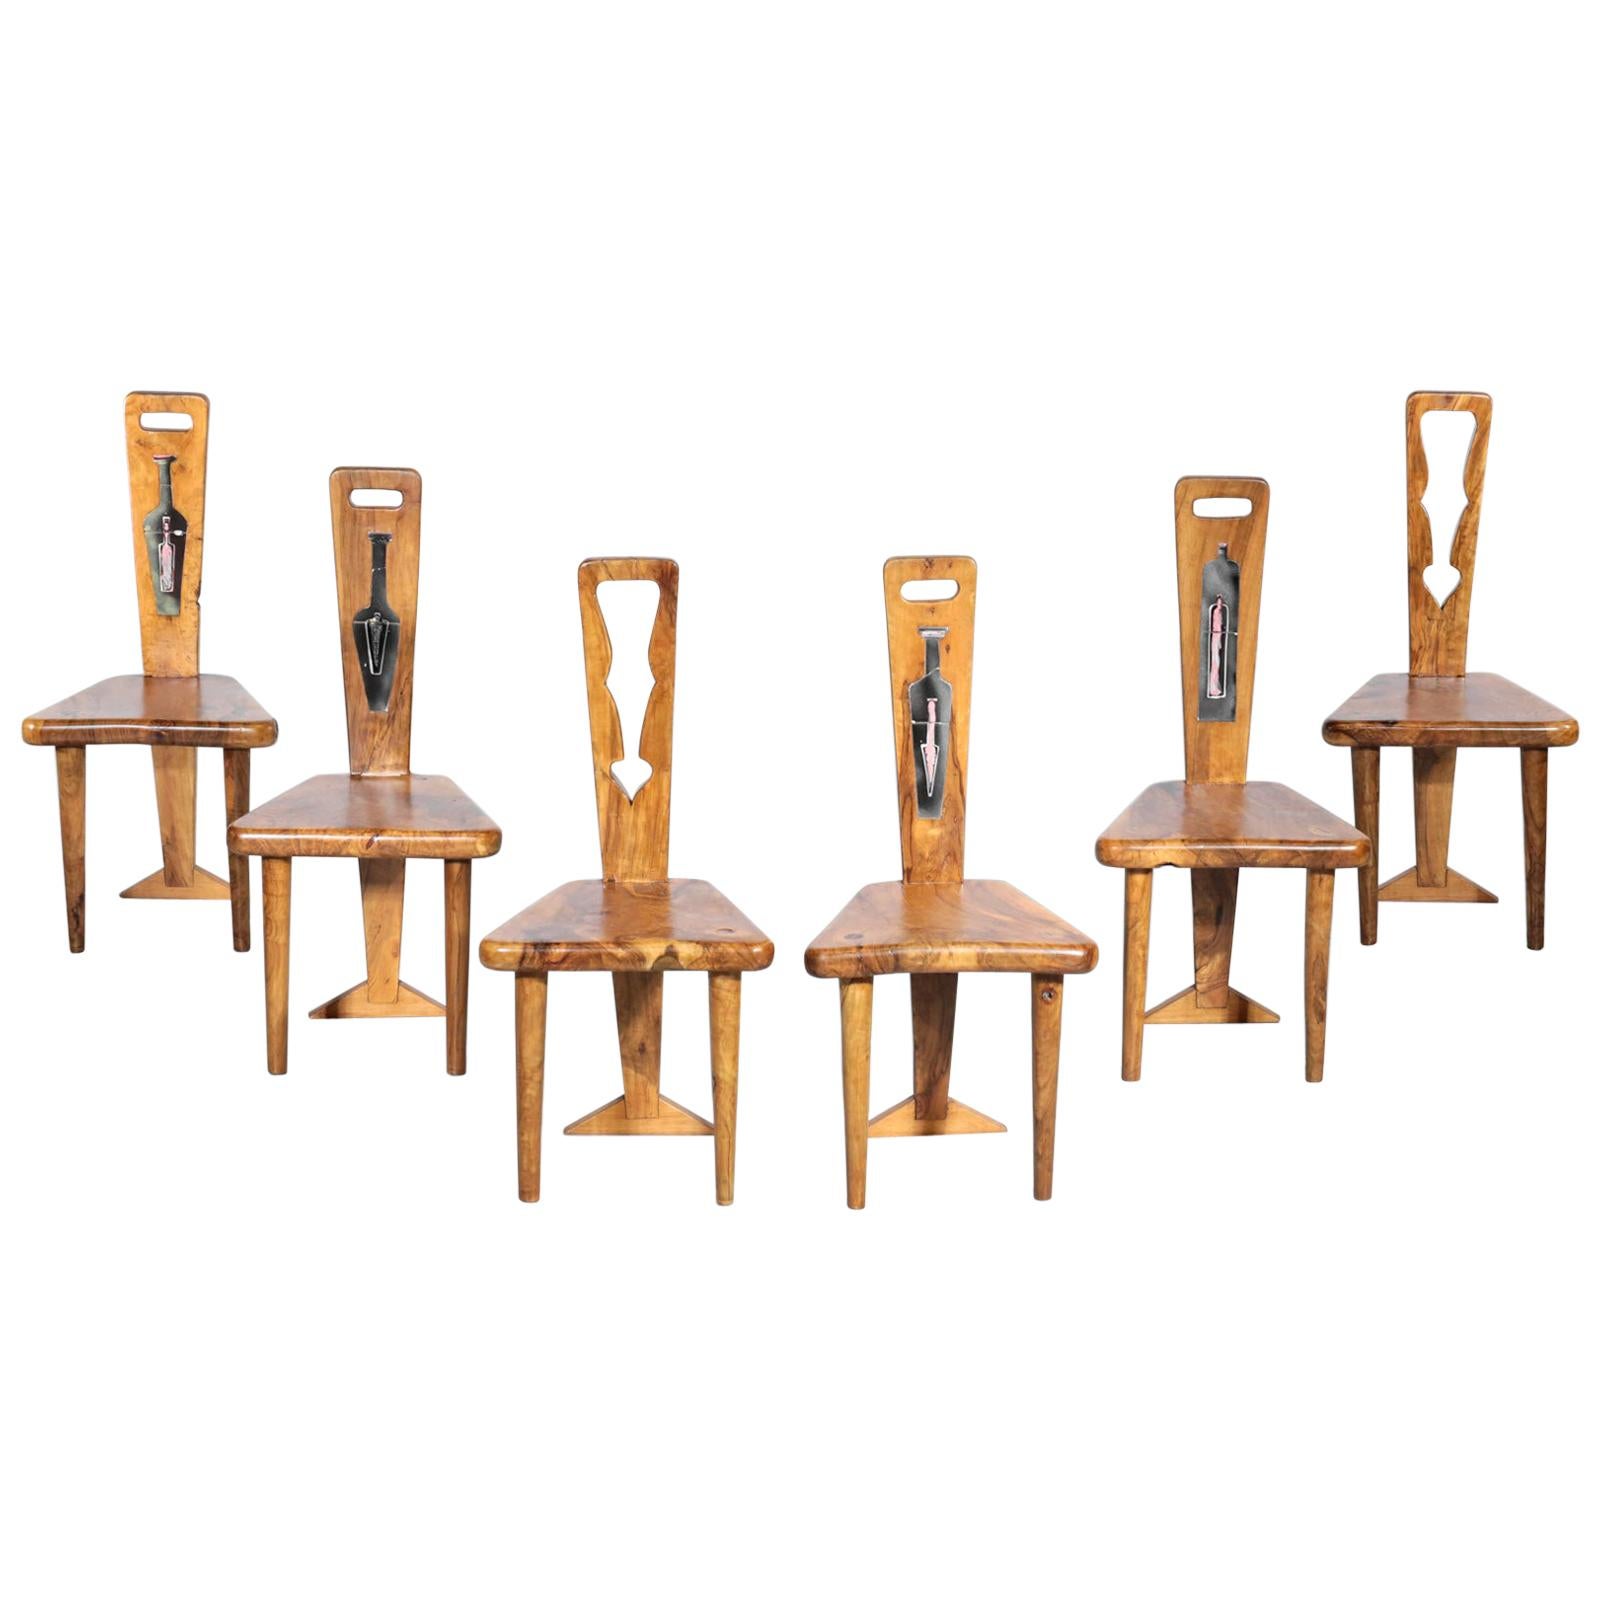 Set of 6 Artisanal Chairs, Olive Wood and Ceramic, 1960s